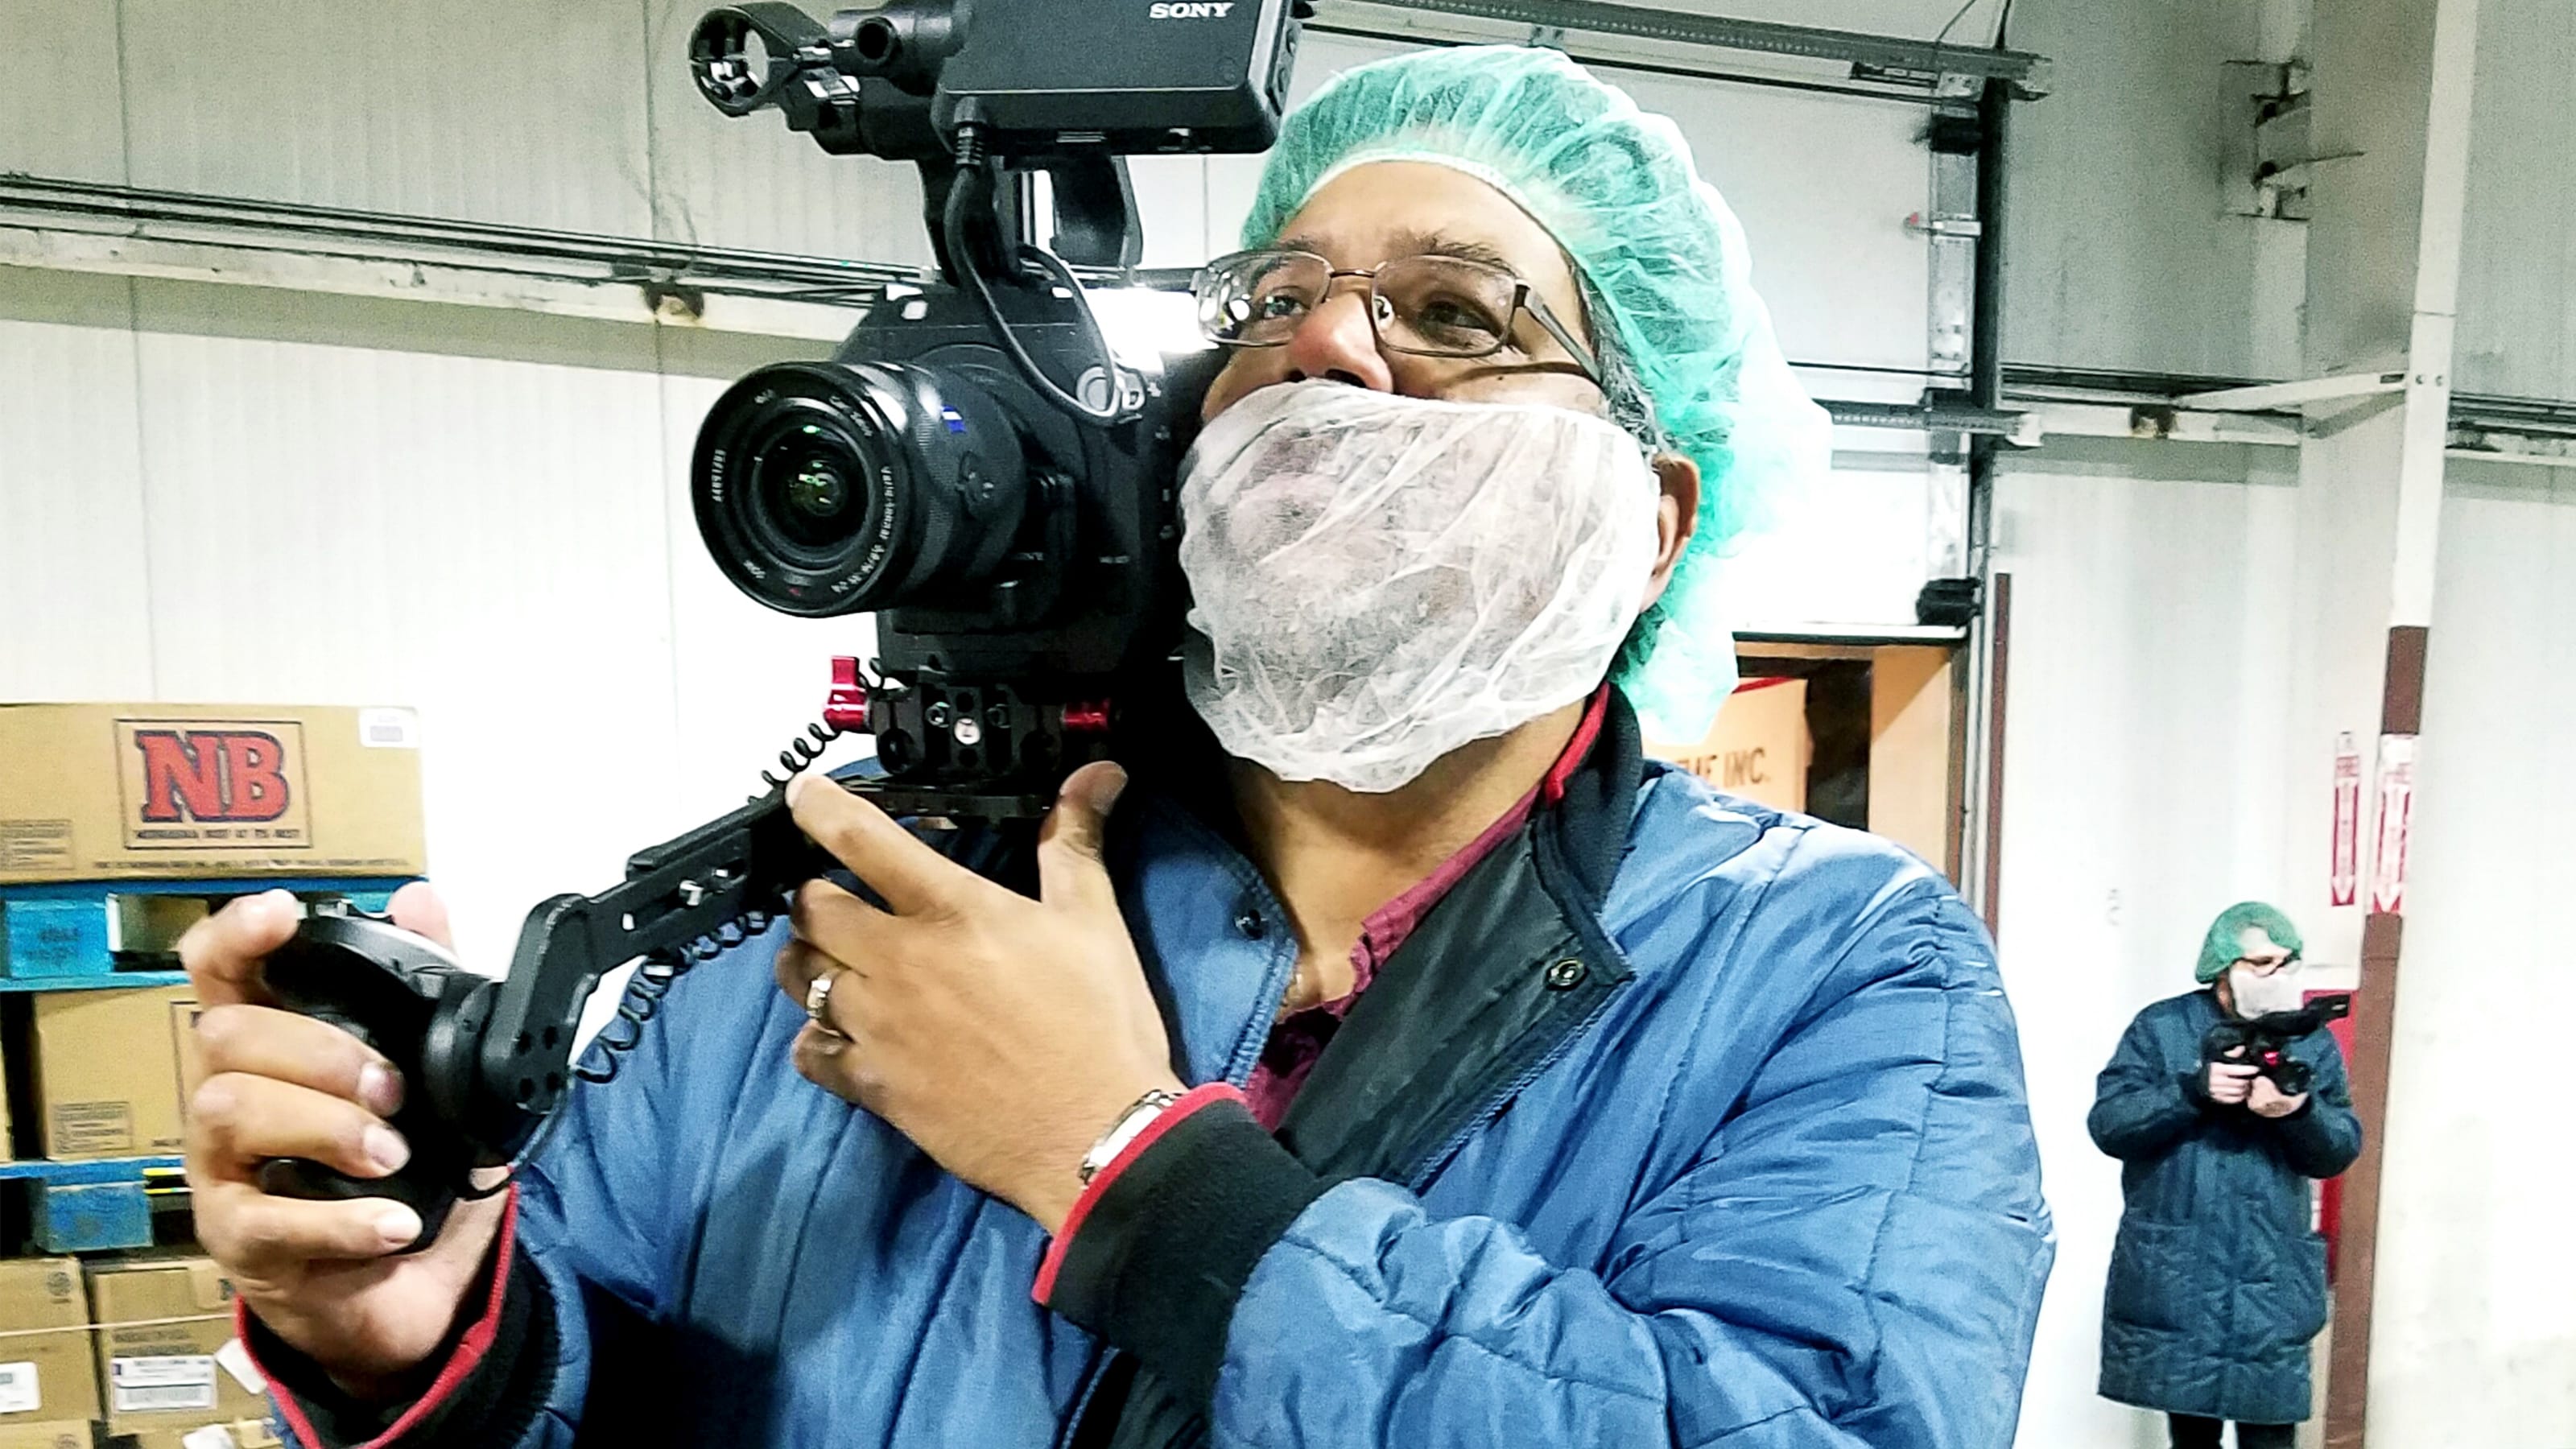 Man wearing a hairnet and beardnet operating a camera in a warehouse.